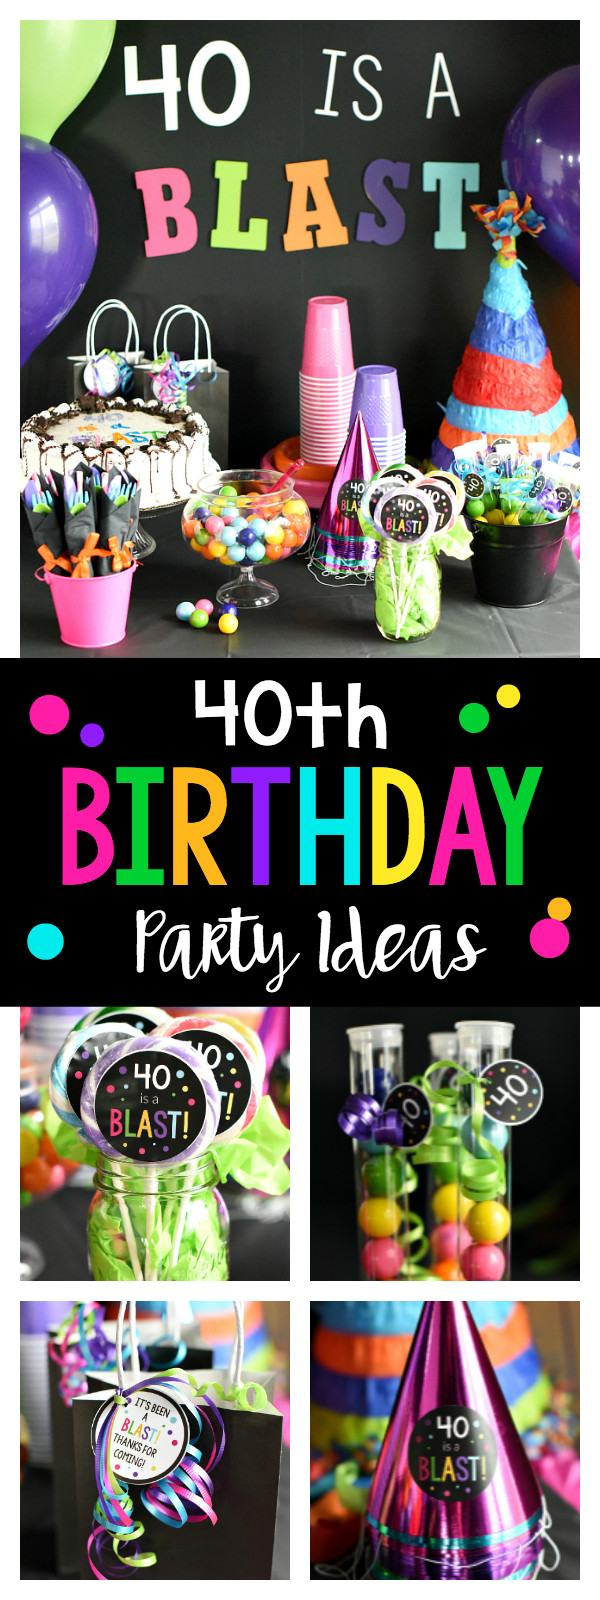 Decorations For 40th Birthday
 40th Birthday Party 40 is a Blast – Fun Squared